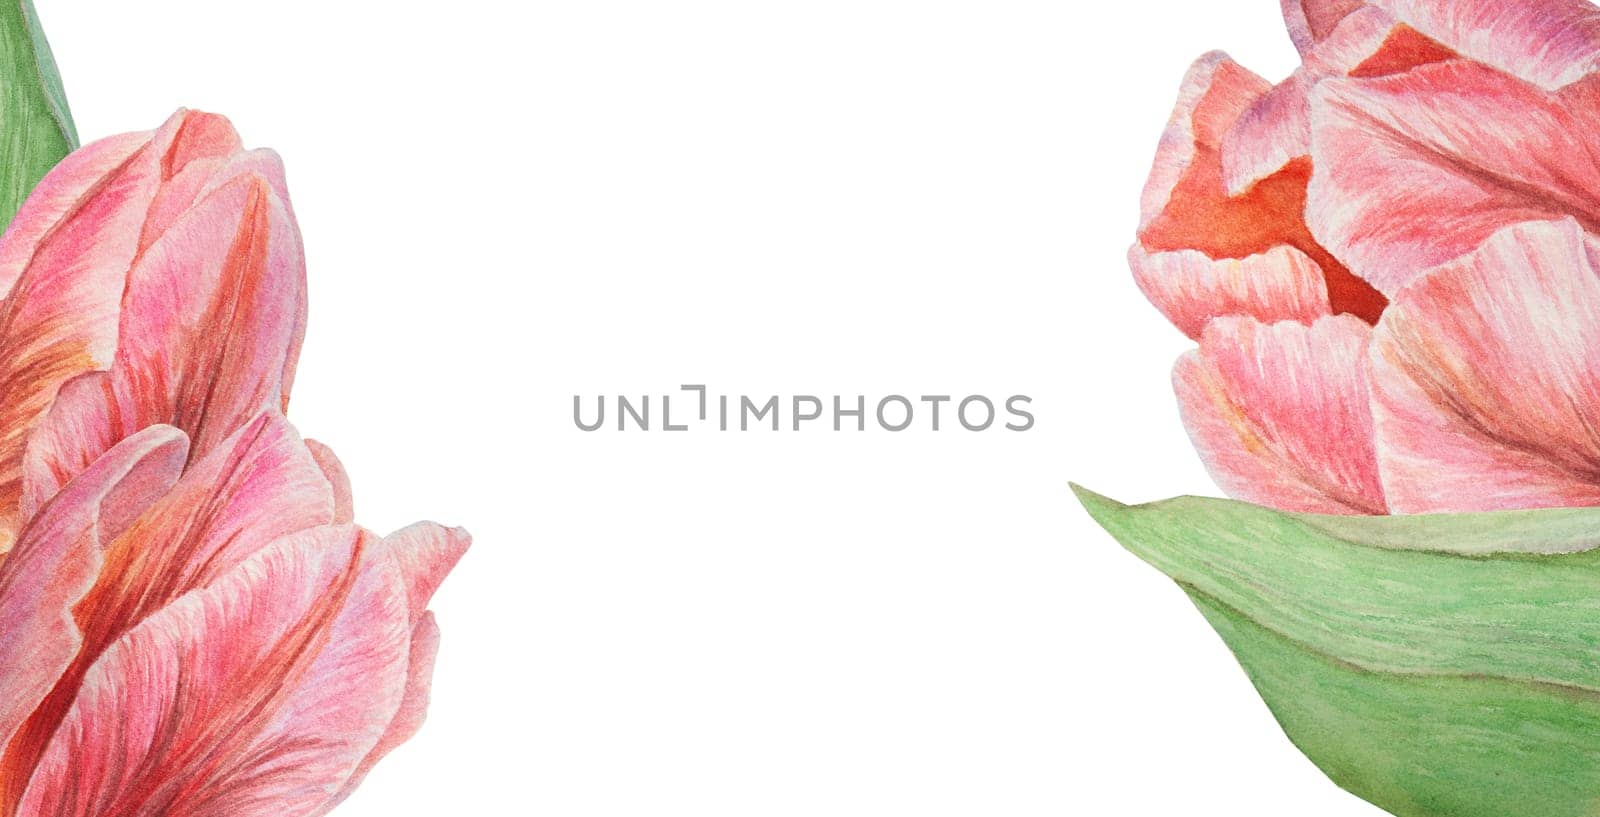 Pink tulips painted in watercolor, realistic botanical hand drawn illustration isolated on white background for design, wedding print products, paper, invitations, cards, fabric, posters by florainlove_art